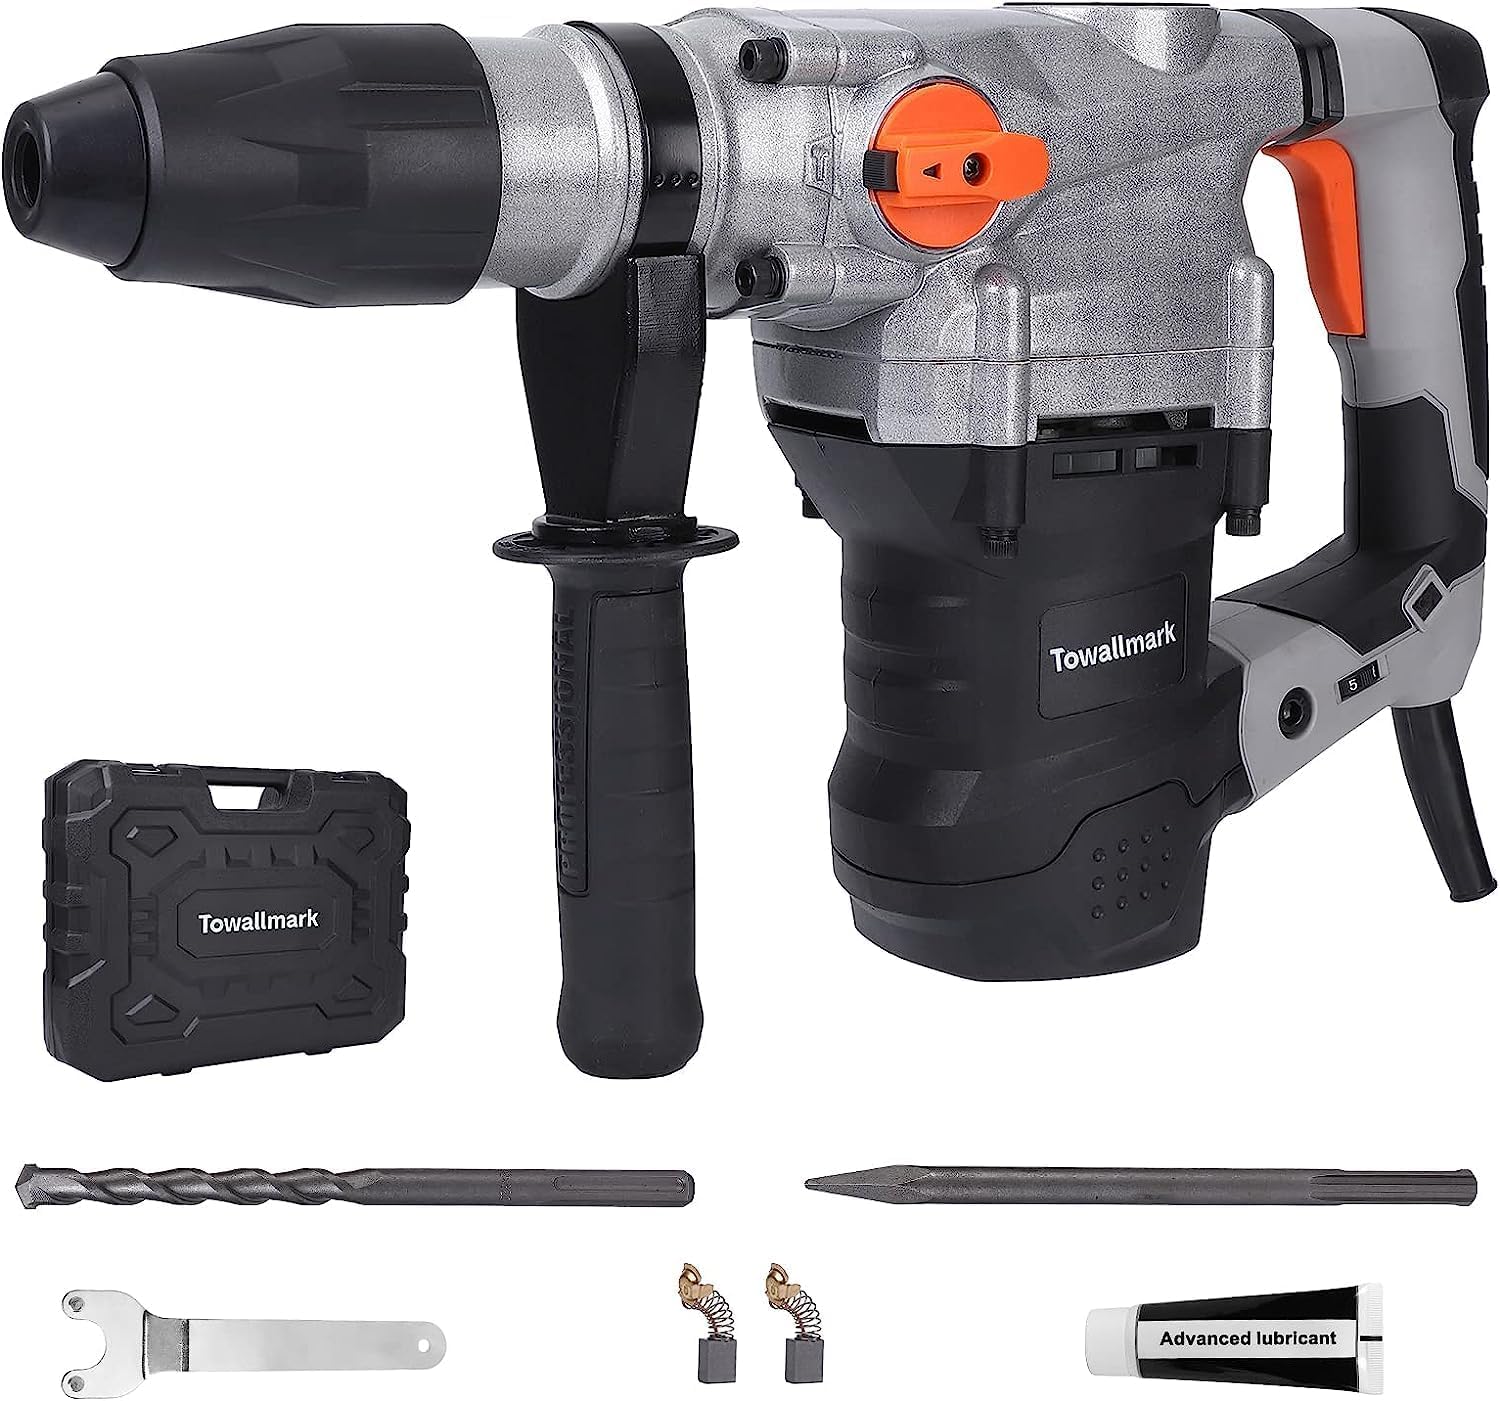 Towallmark1-9/16Inch Heavy Duty Rotary Hammer Drill, 360°Adjustable Rotary Hammer Safety Clutch 3 Functions with Vibration Control 13 Amp Rotary Hammer Chisels and Drill Bits with Case